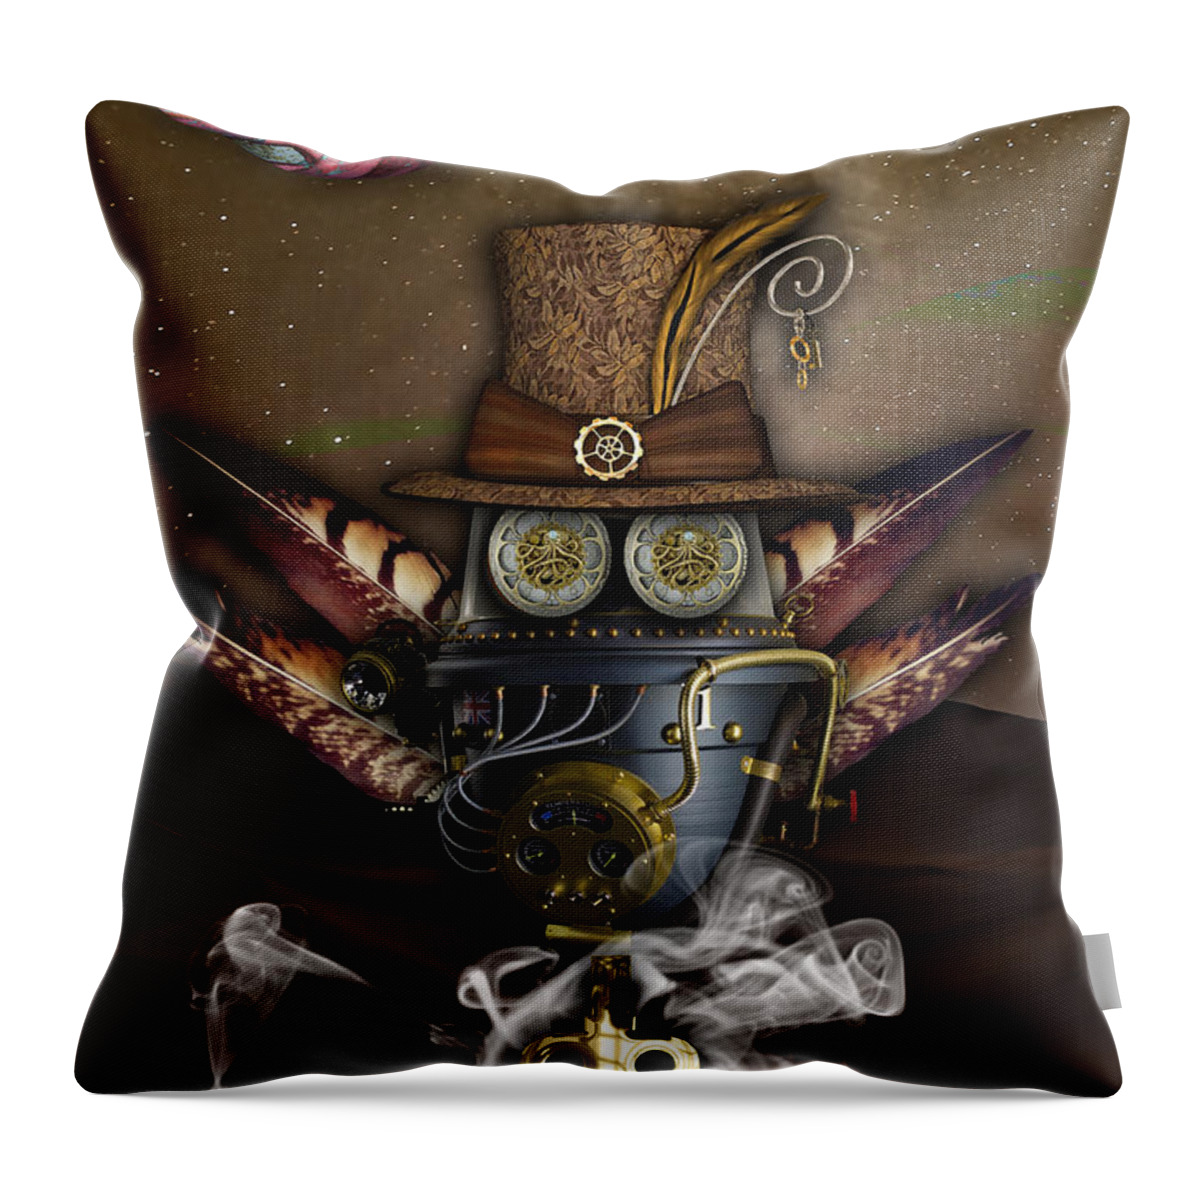 Steampunk Throw Pillow featuring the mixed media Steampunk Art #24 by Marvin Blaine